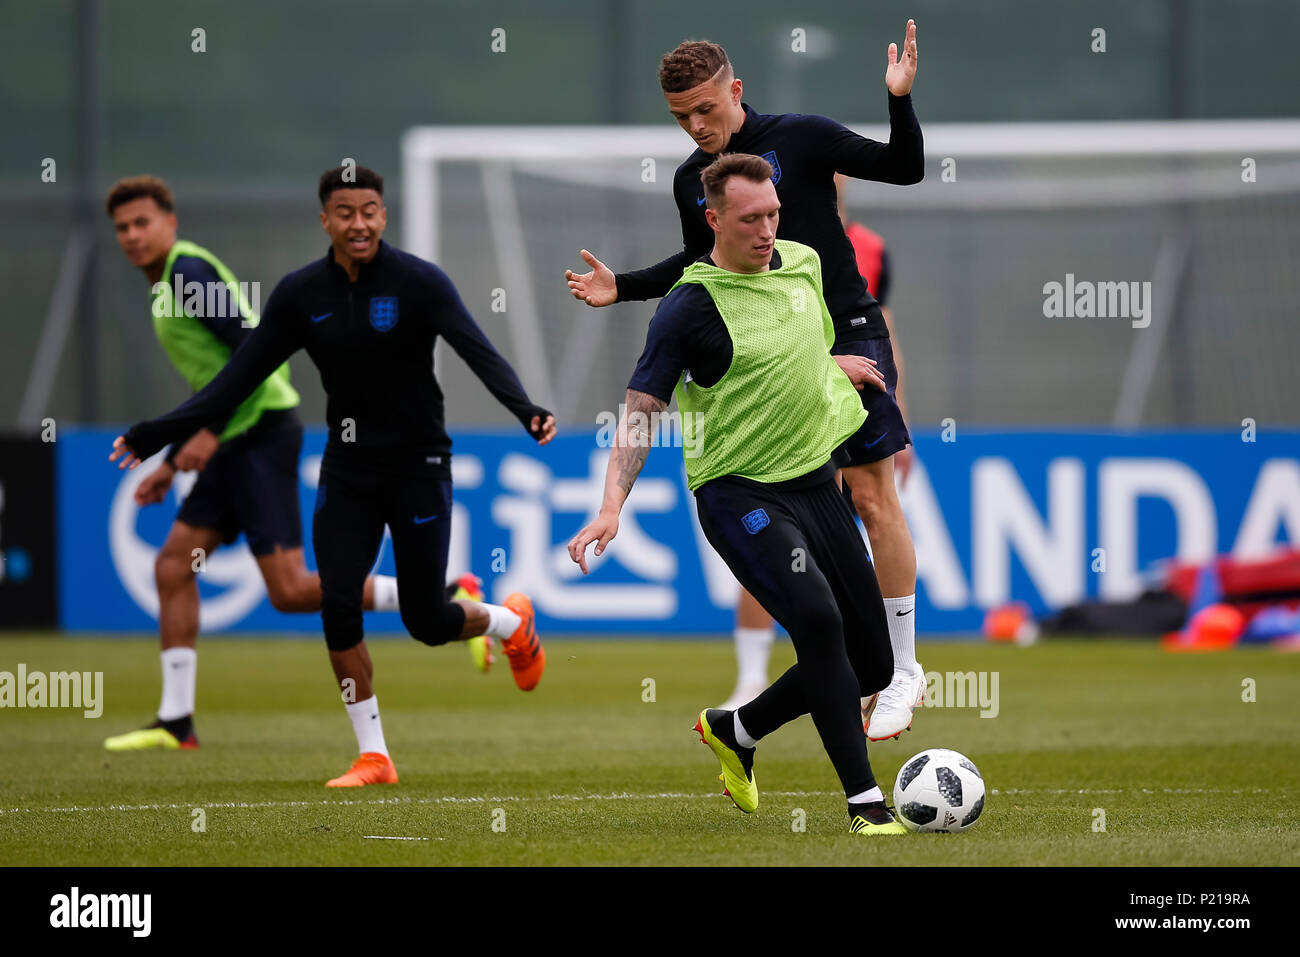 Zelenogorsk, Russia. 13th June 2018. Phil Jones of England and Kieran Trippier of England during an England training session at Stadium Spartak Zelenogorsk on June 13th 2018 in Zelenogorsk, Saint Petersburg, Russia. Credit: PHC Images/Alamy Live News Stock Photo